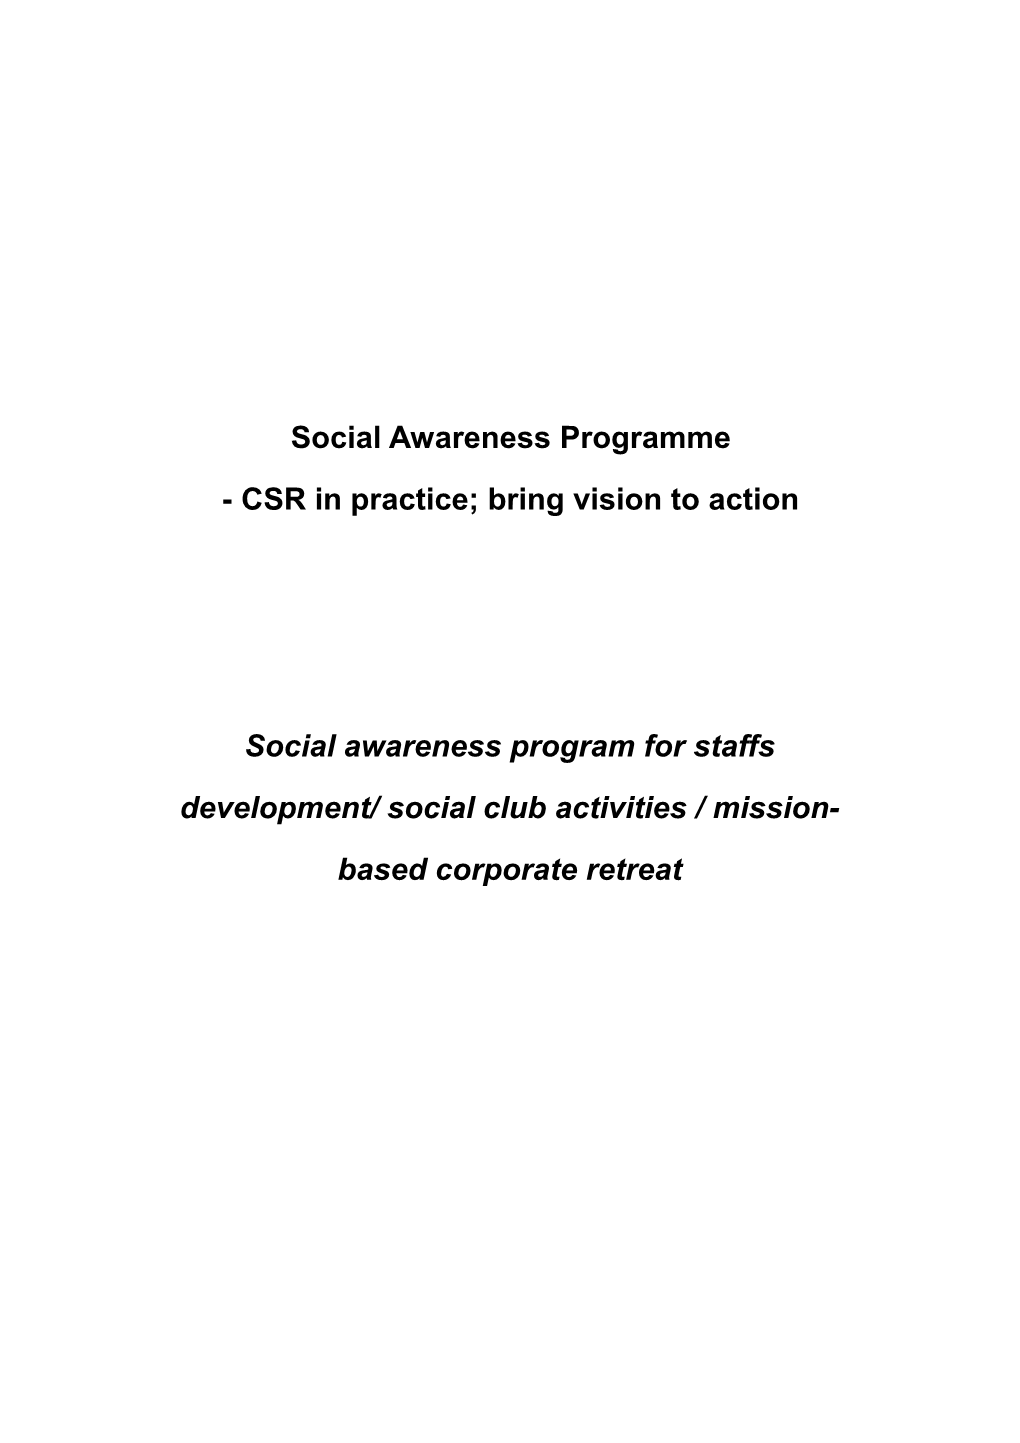 CSR in Practice; Bring Vision to Action